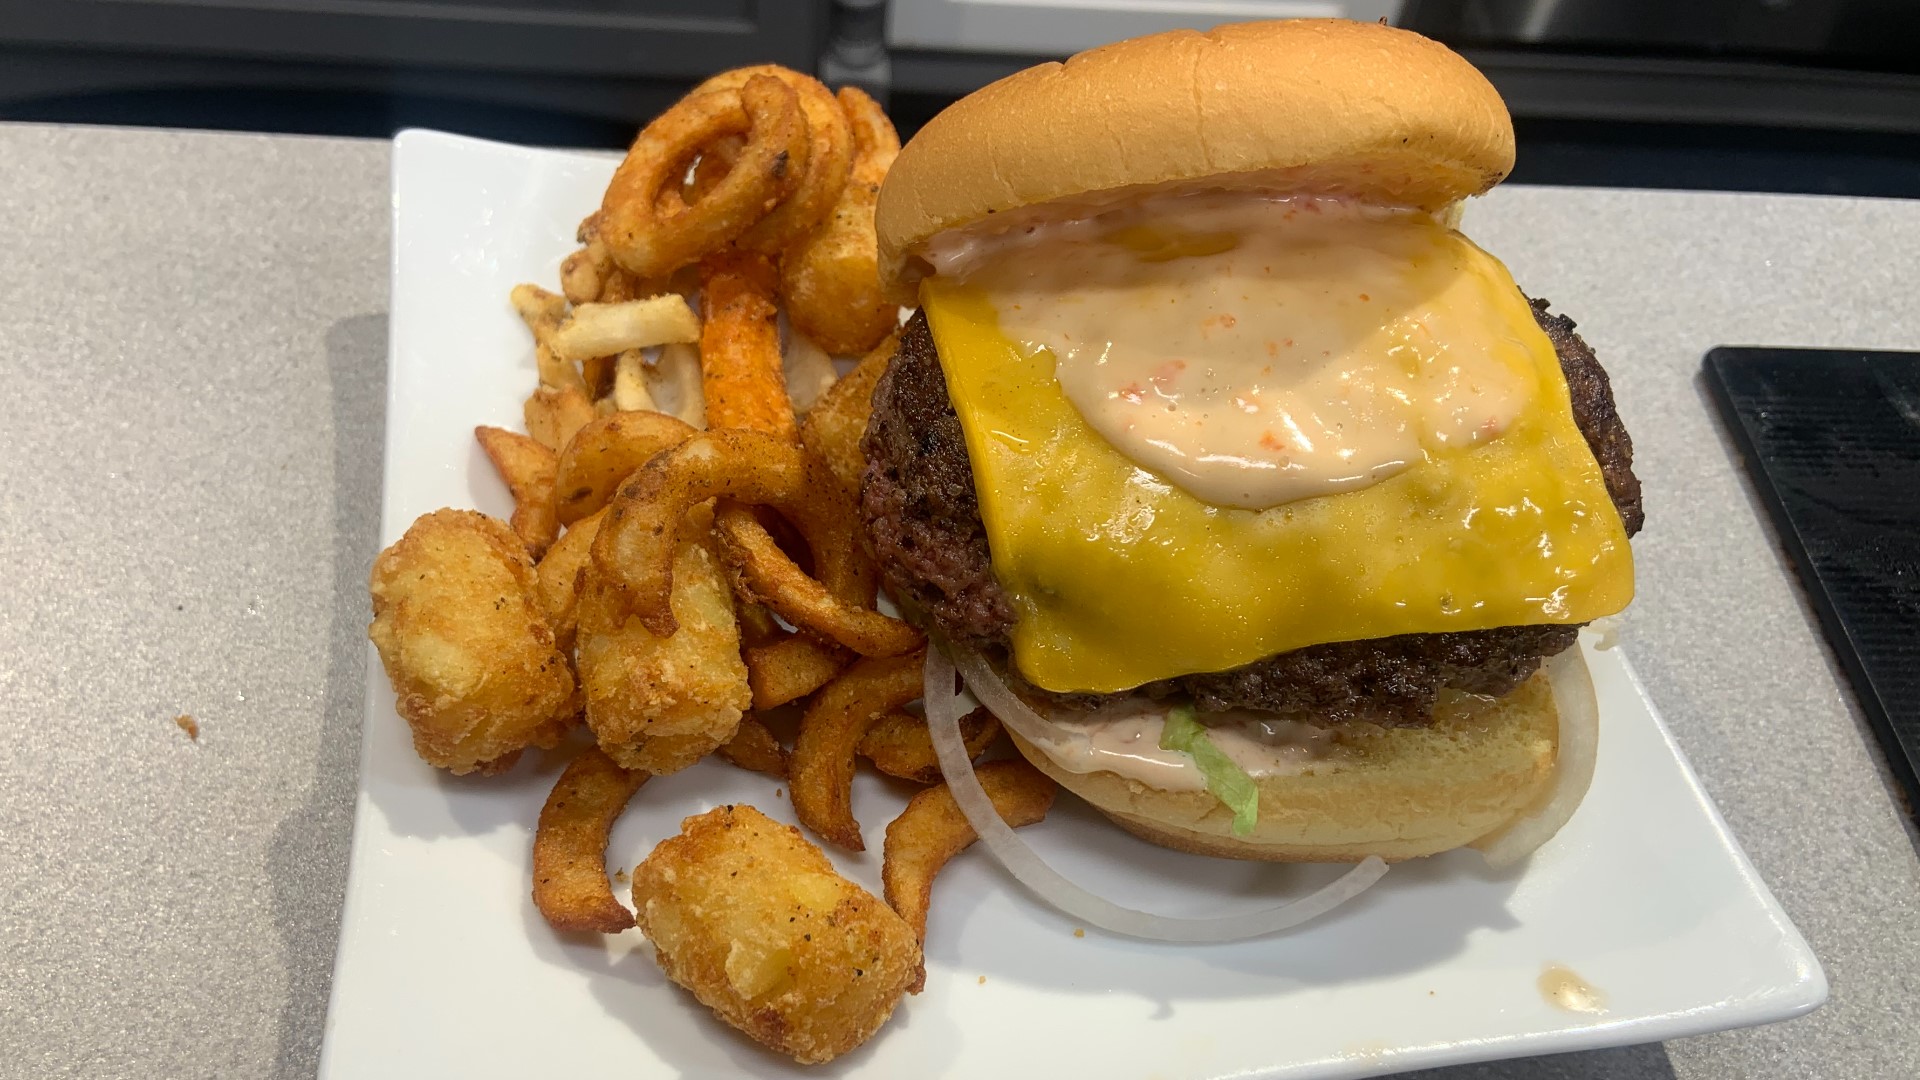 National Cheeseburger Day is celebrated on Sept. 18, and Greer's Burger Garage in Dover is hitting the griddle early to prepare some special creations.